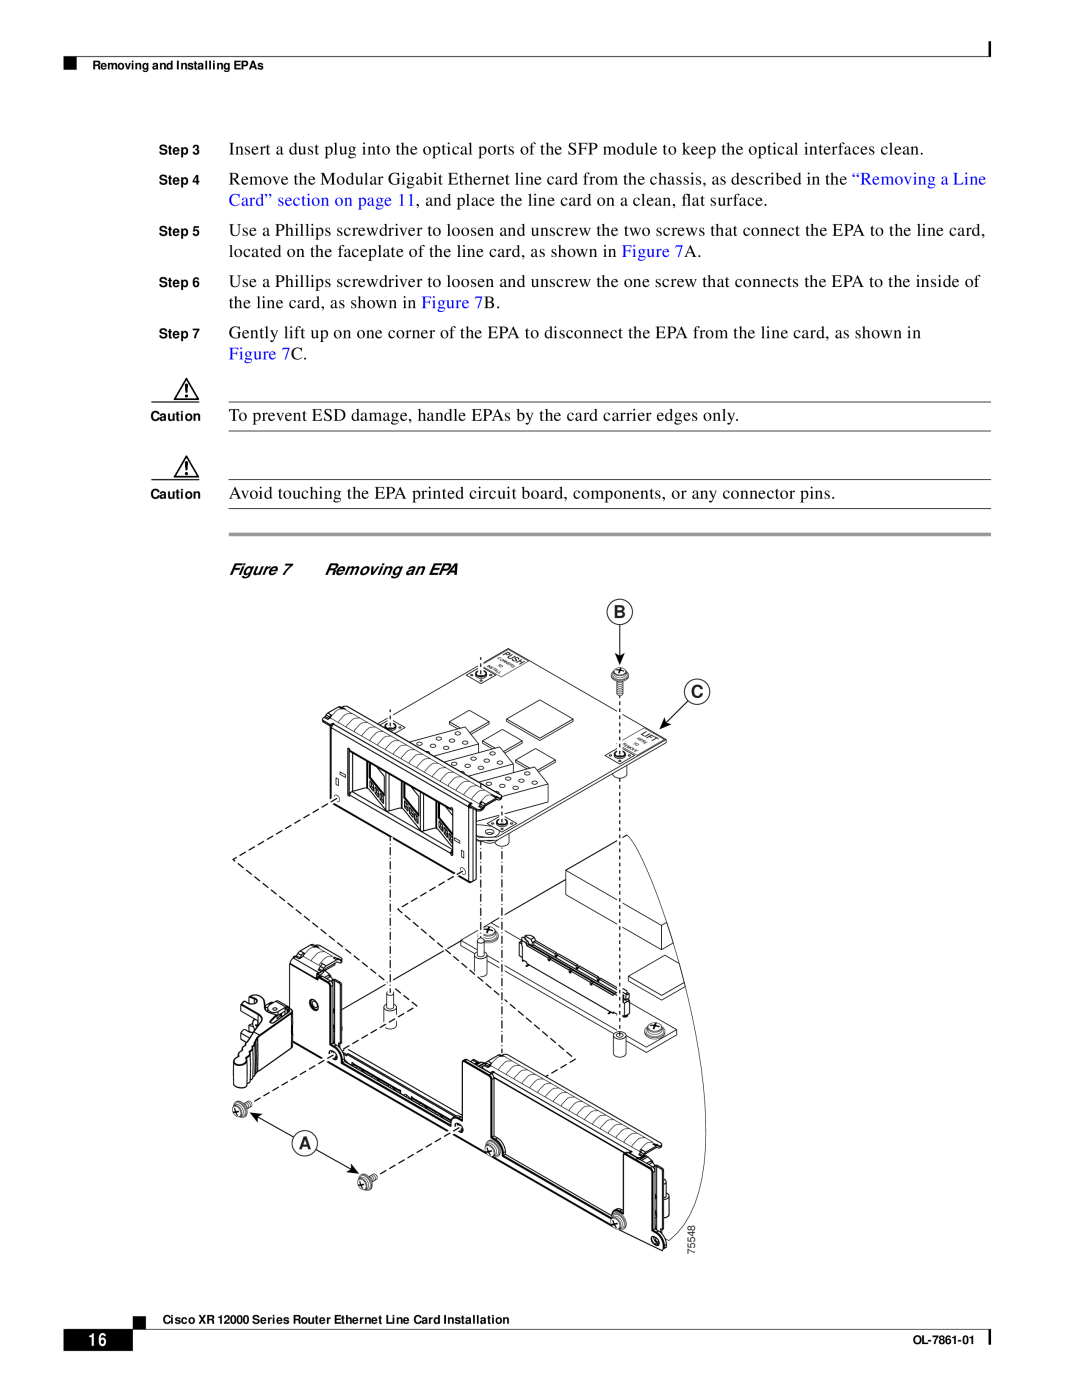 Cisco Systems OL-7861-01 manual Removing an EPA 